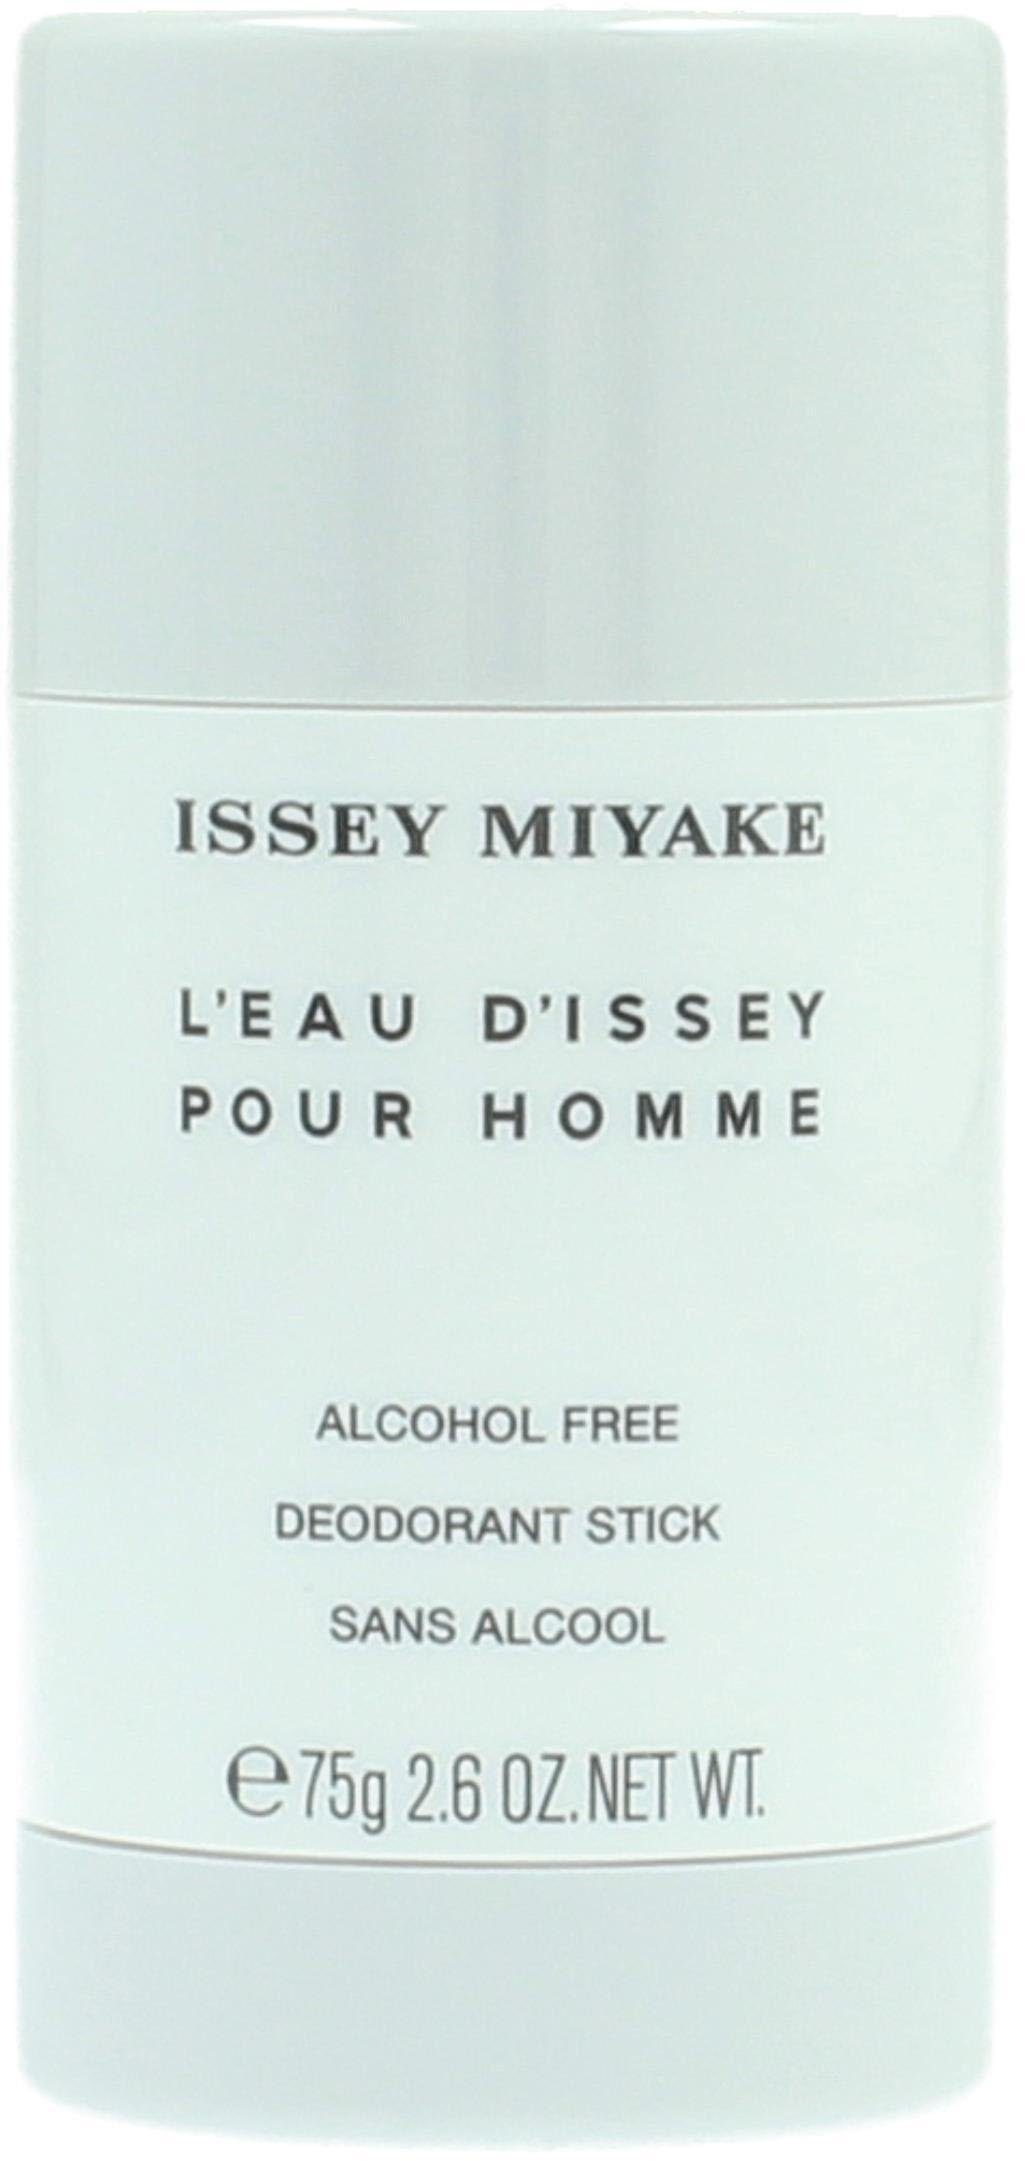 Pour Homme D'Issey Deo-Stift Issey L'Eau Miyake